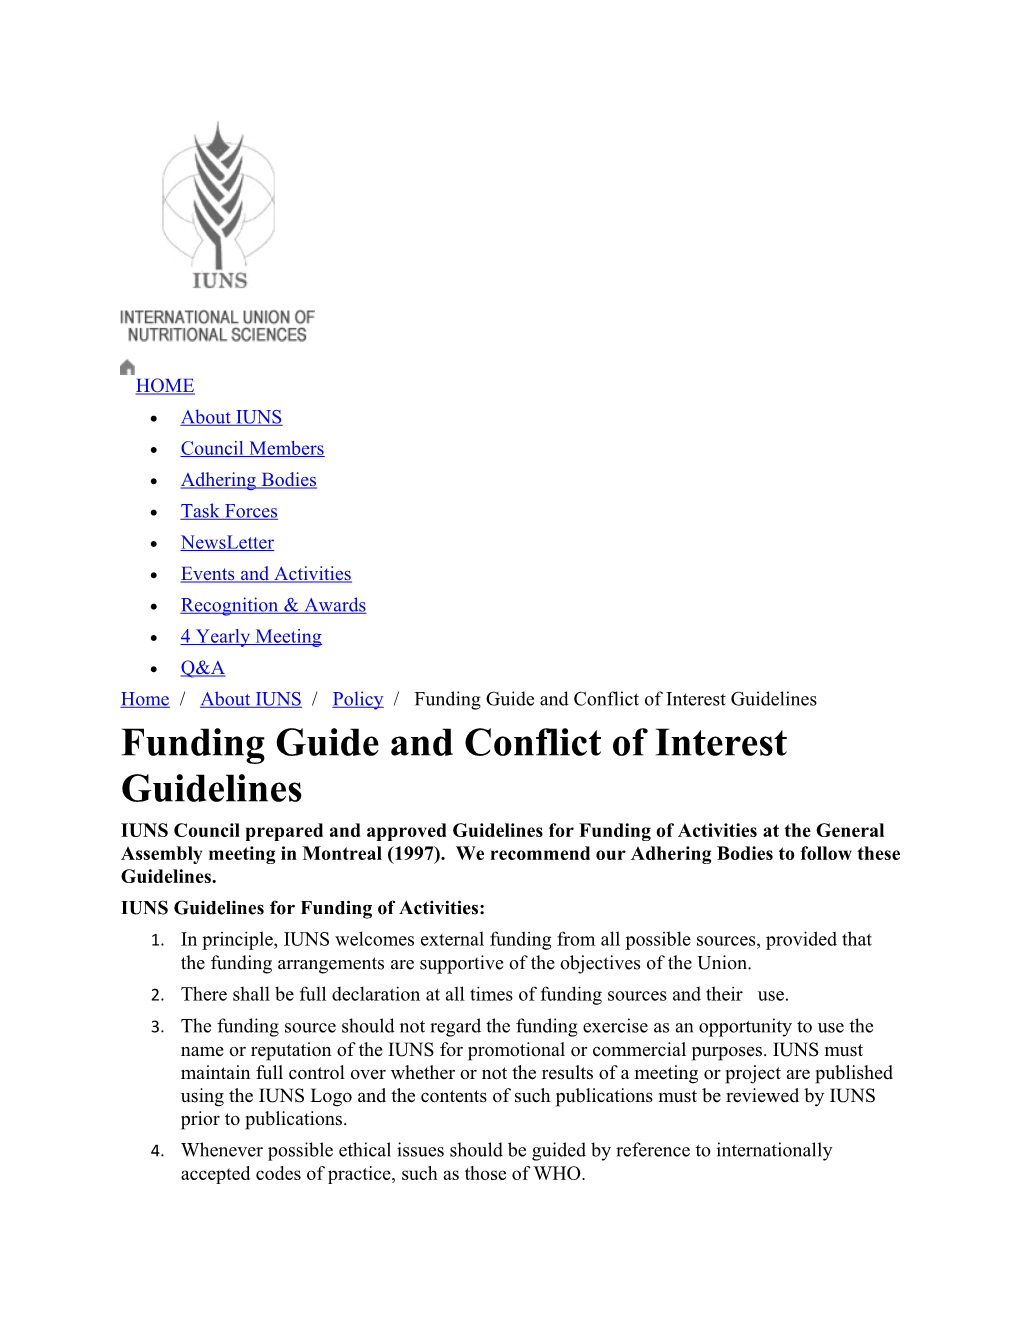 Home/ About IUNS/ Policy/ Funding Guide and Conflict of Interest Guidelines